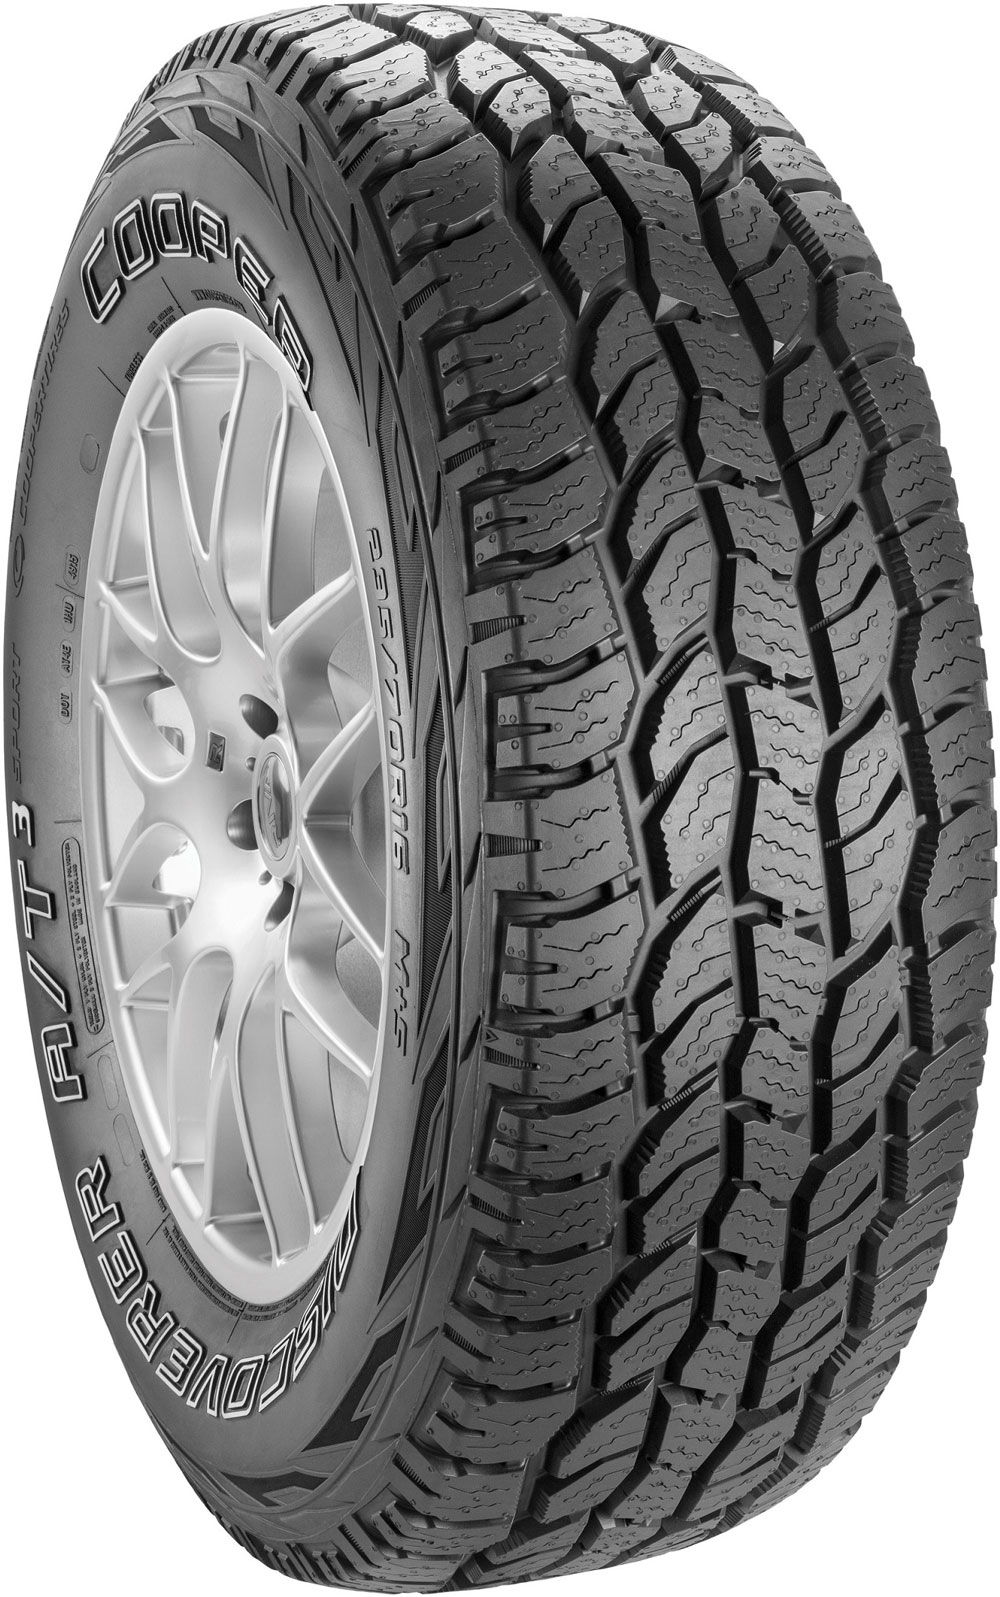 COOPER DISCOVERER A/T3 SPORT BSW 205/80 R16 110S